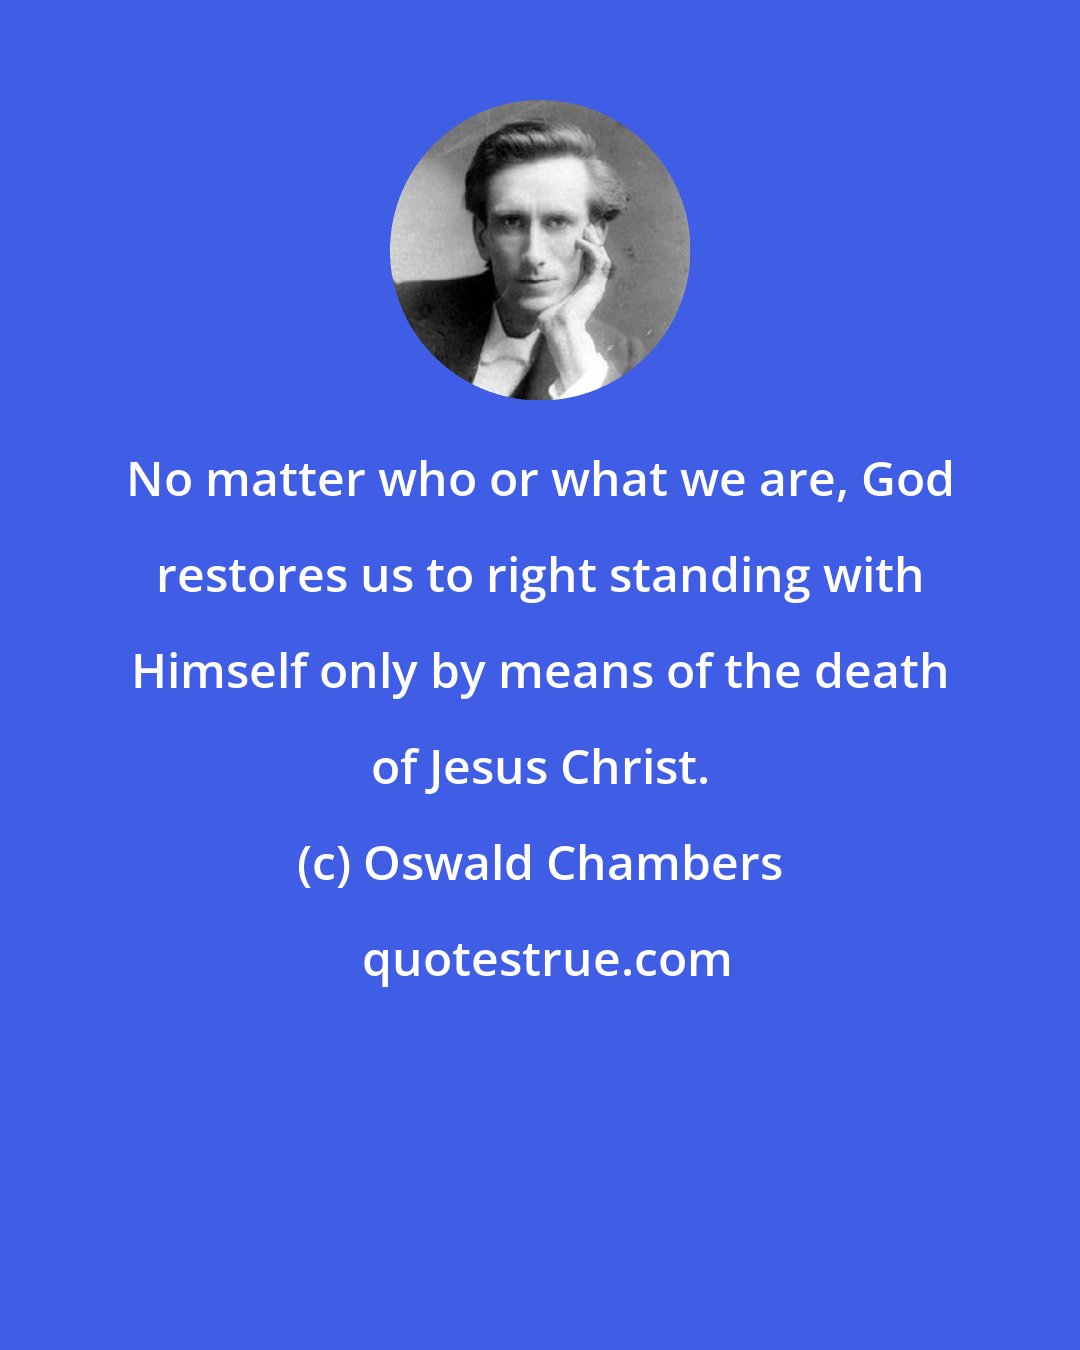 Oswald Chambers: No matter who or what we are, God restores us to right standing with Himself only by means of the death of Jesus Christ.